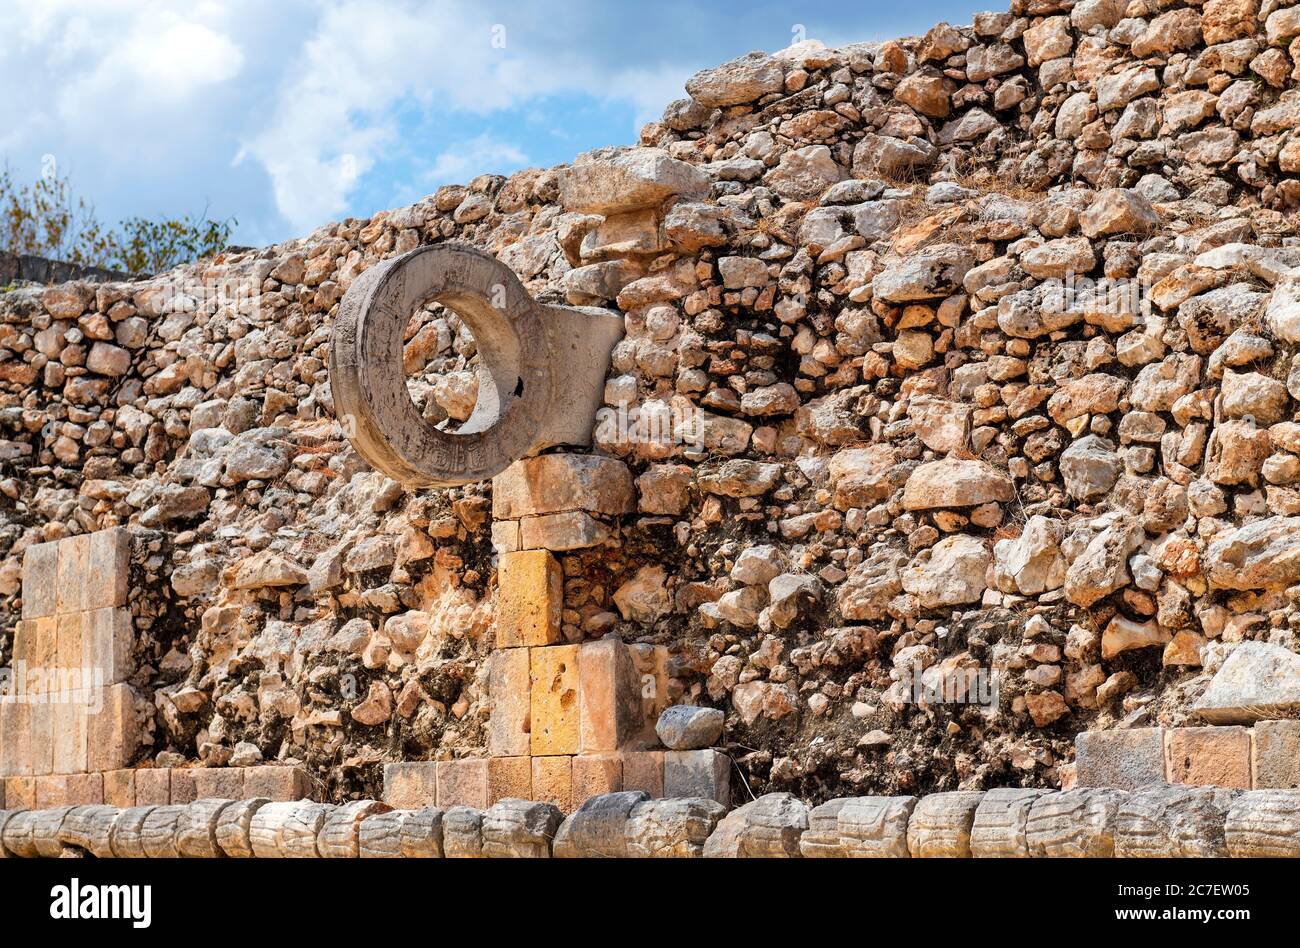 A Maya ball game ring in the archaeological site of Chichen Itza, Yucatan, Mexico. Stock Photo